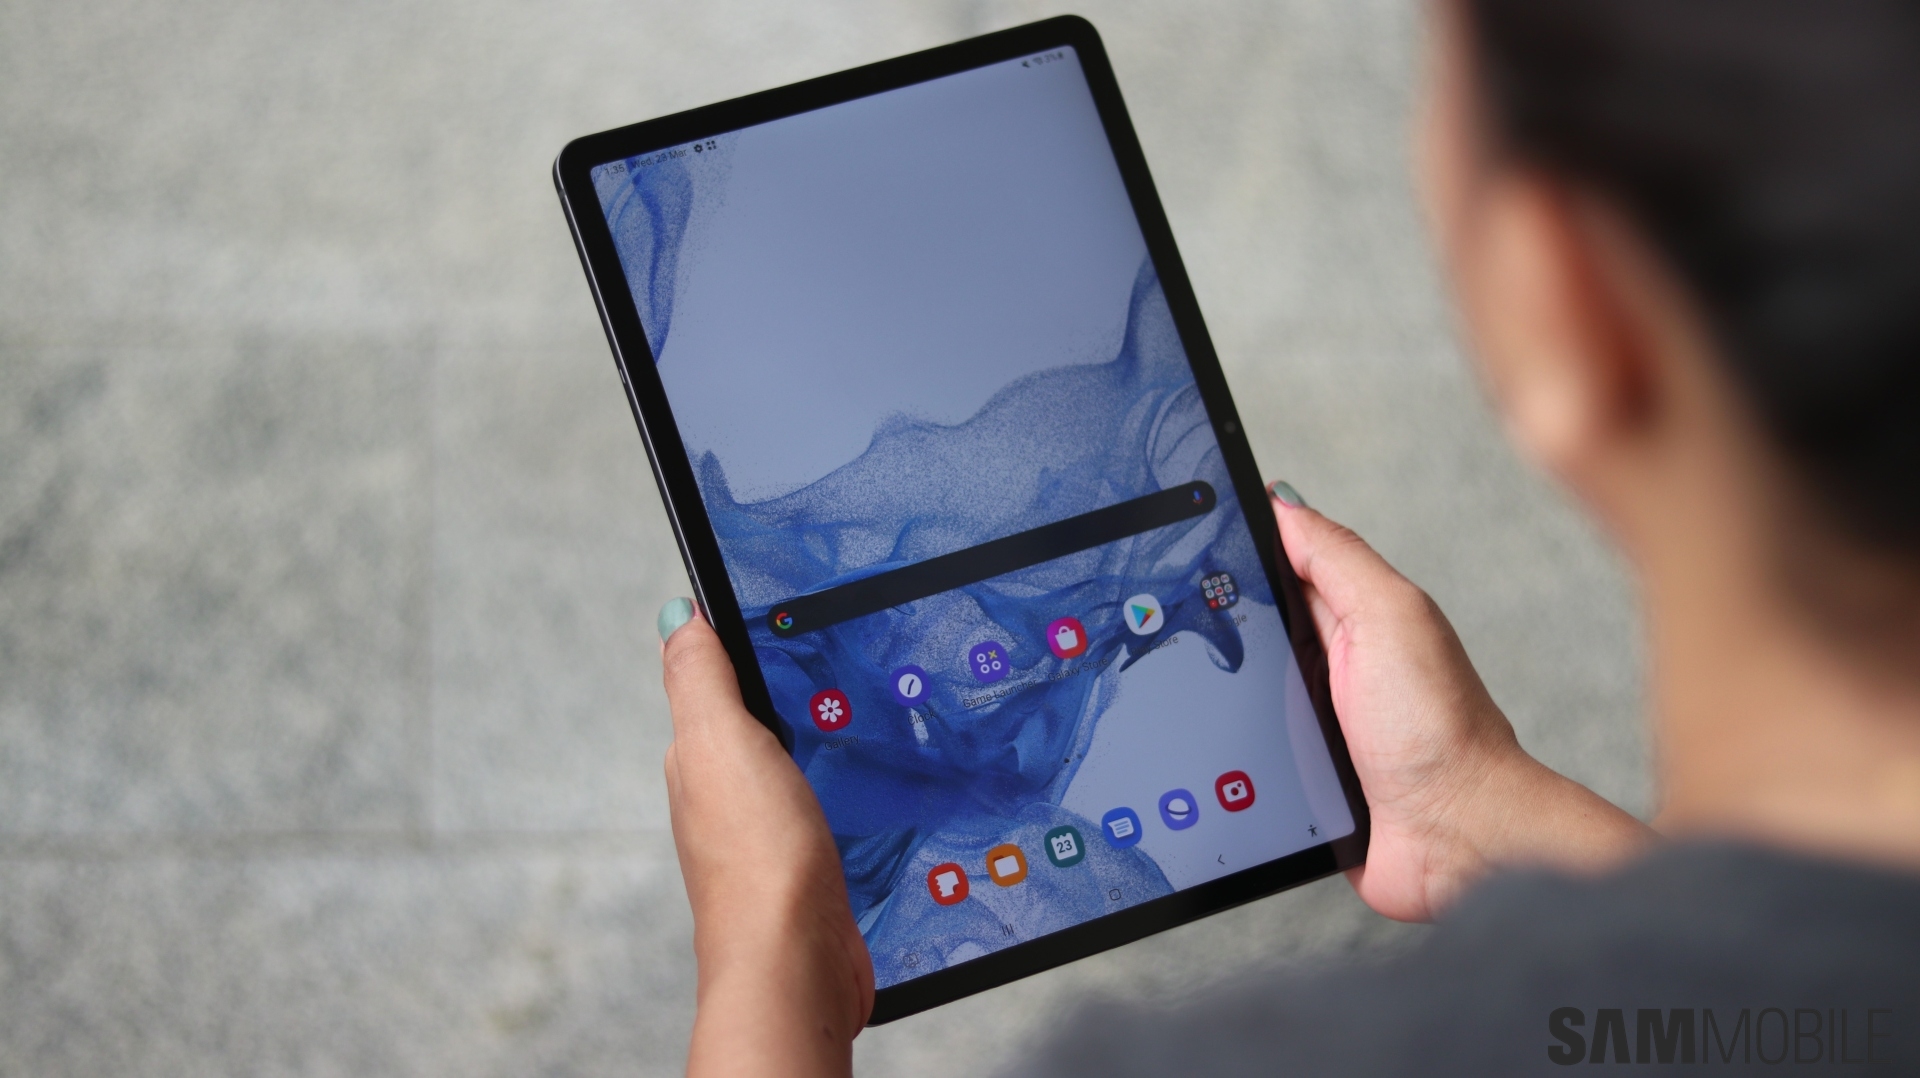 Samsung Galaxy Tab S8 series gets stable Android 13 and One UI 5.0